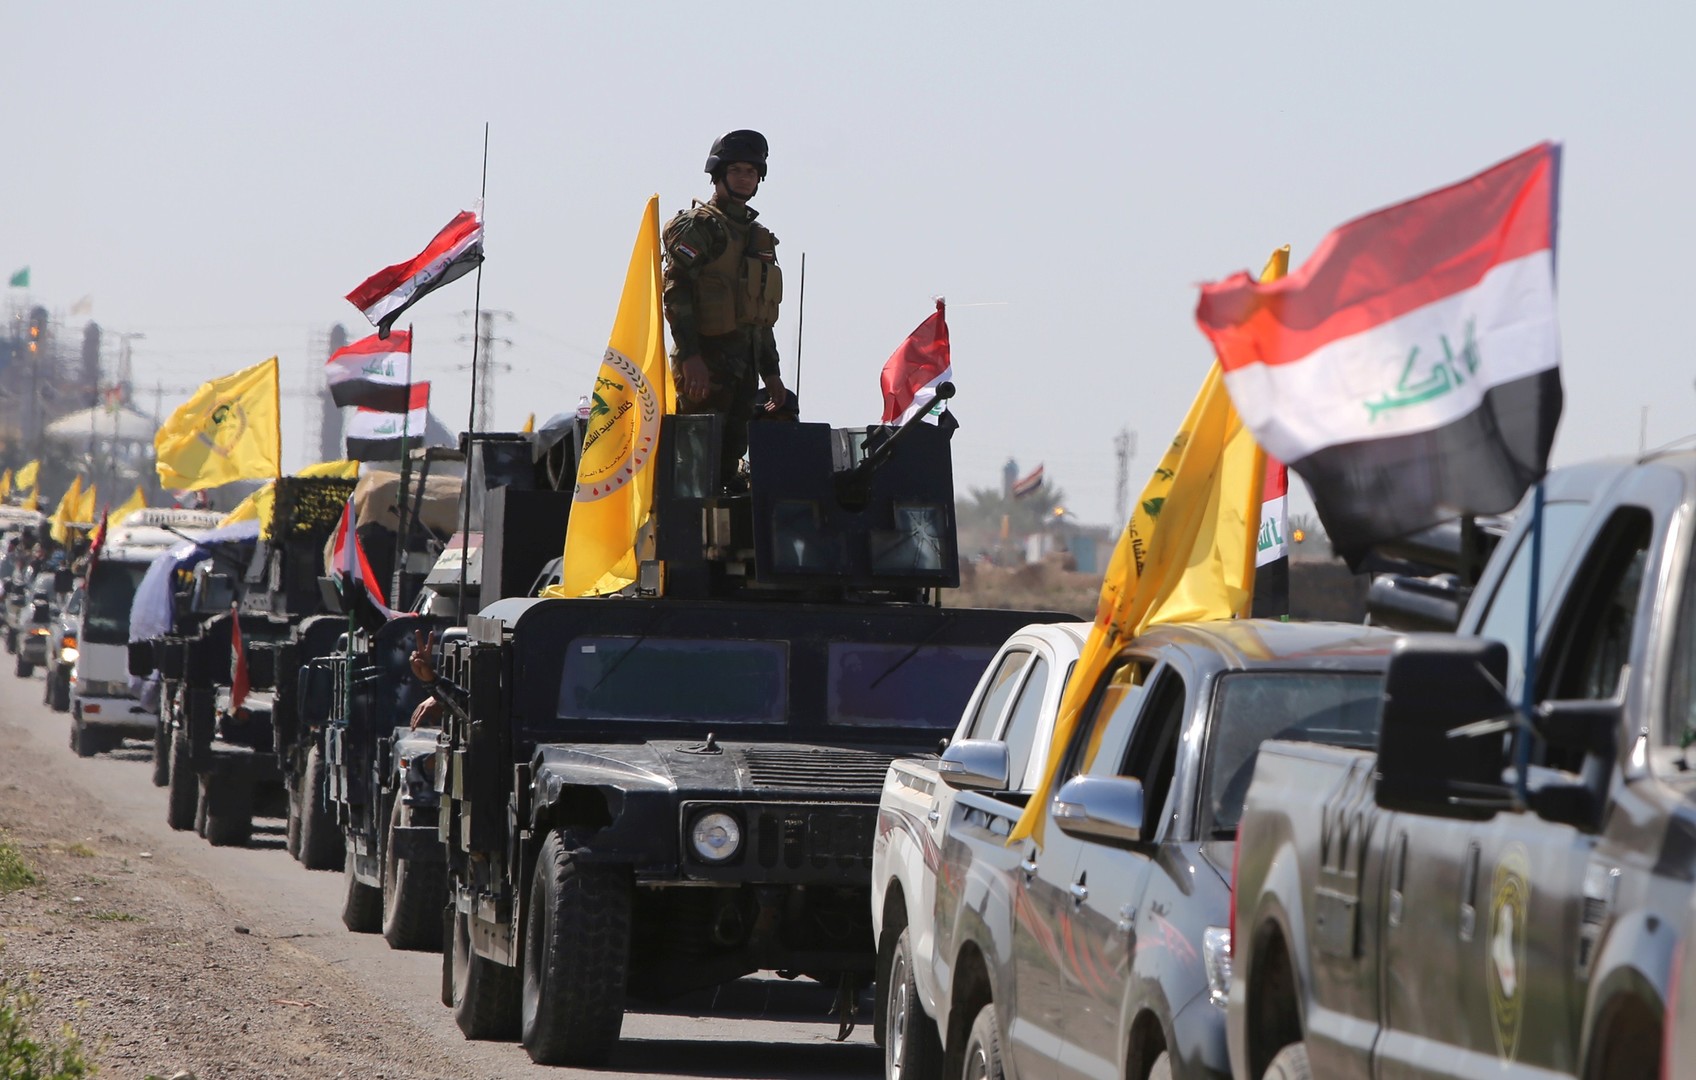 Popular Mobilization Units descend upon western Mosul in northern Iraq to assist government forces in routing ISIS from the city. (Photo: Reuters)